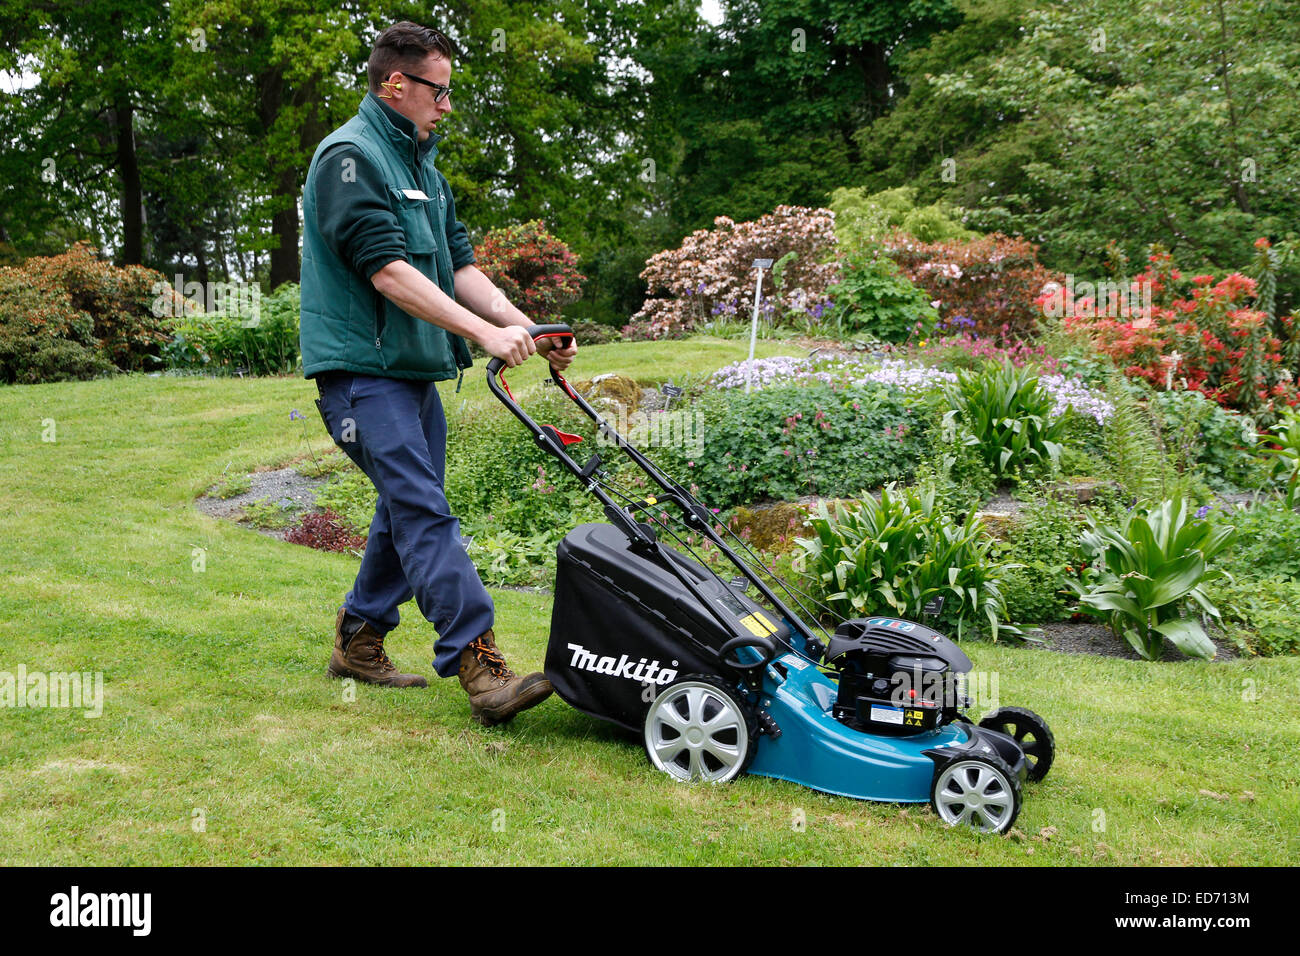 Lawn Mowing with petrol mower Stock Photo